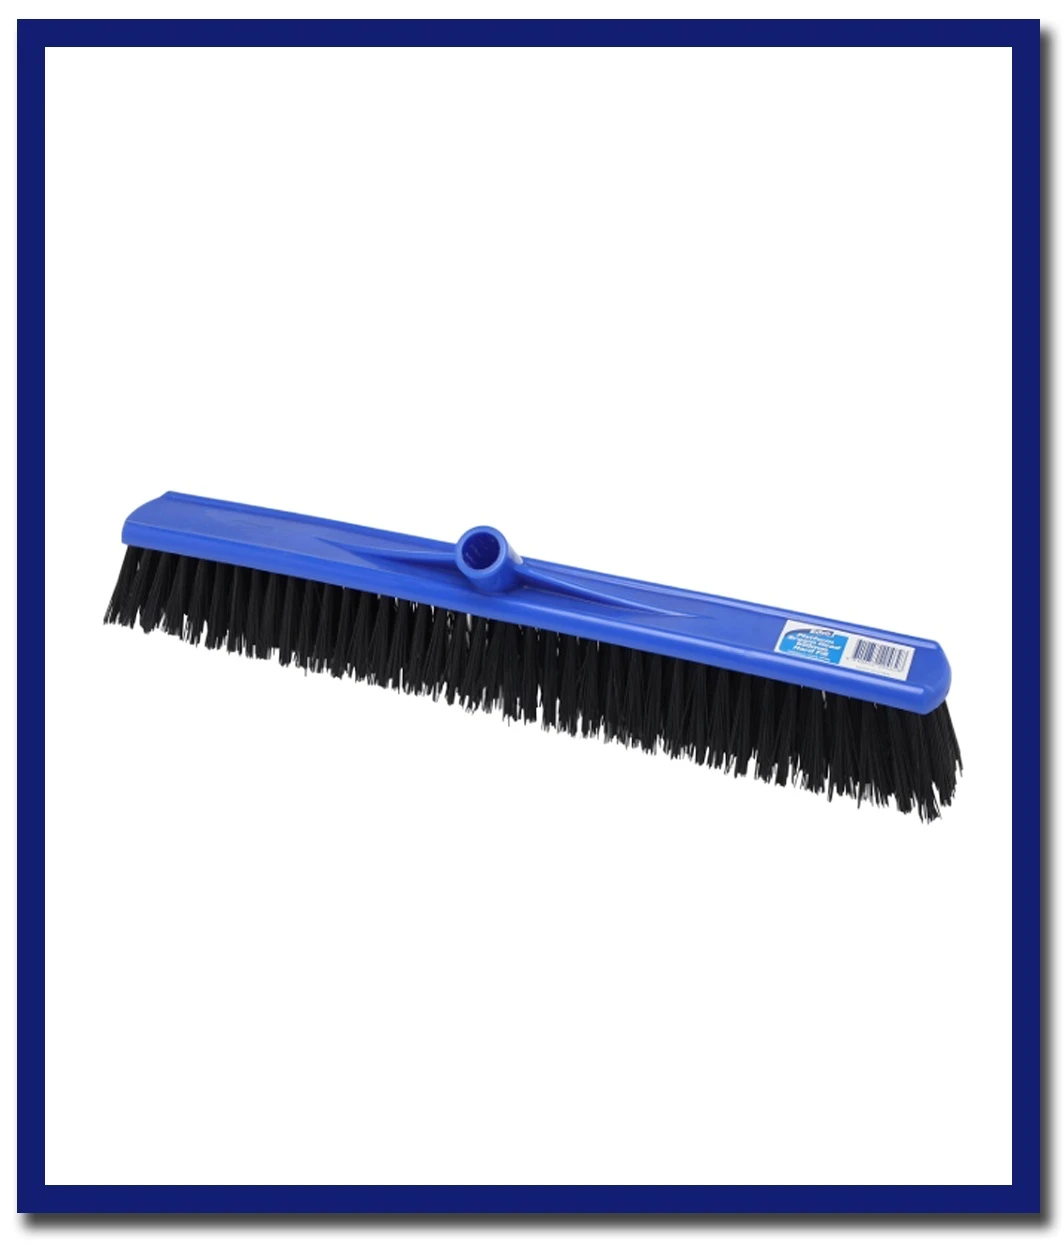 Edco Platform Broom Head - 1 Unit - Stone Doctor Australia - Cleaning Products > Brooms > Accessories